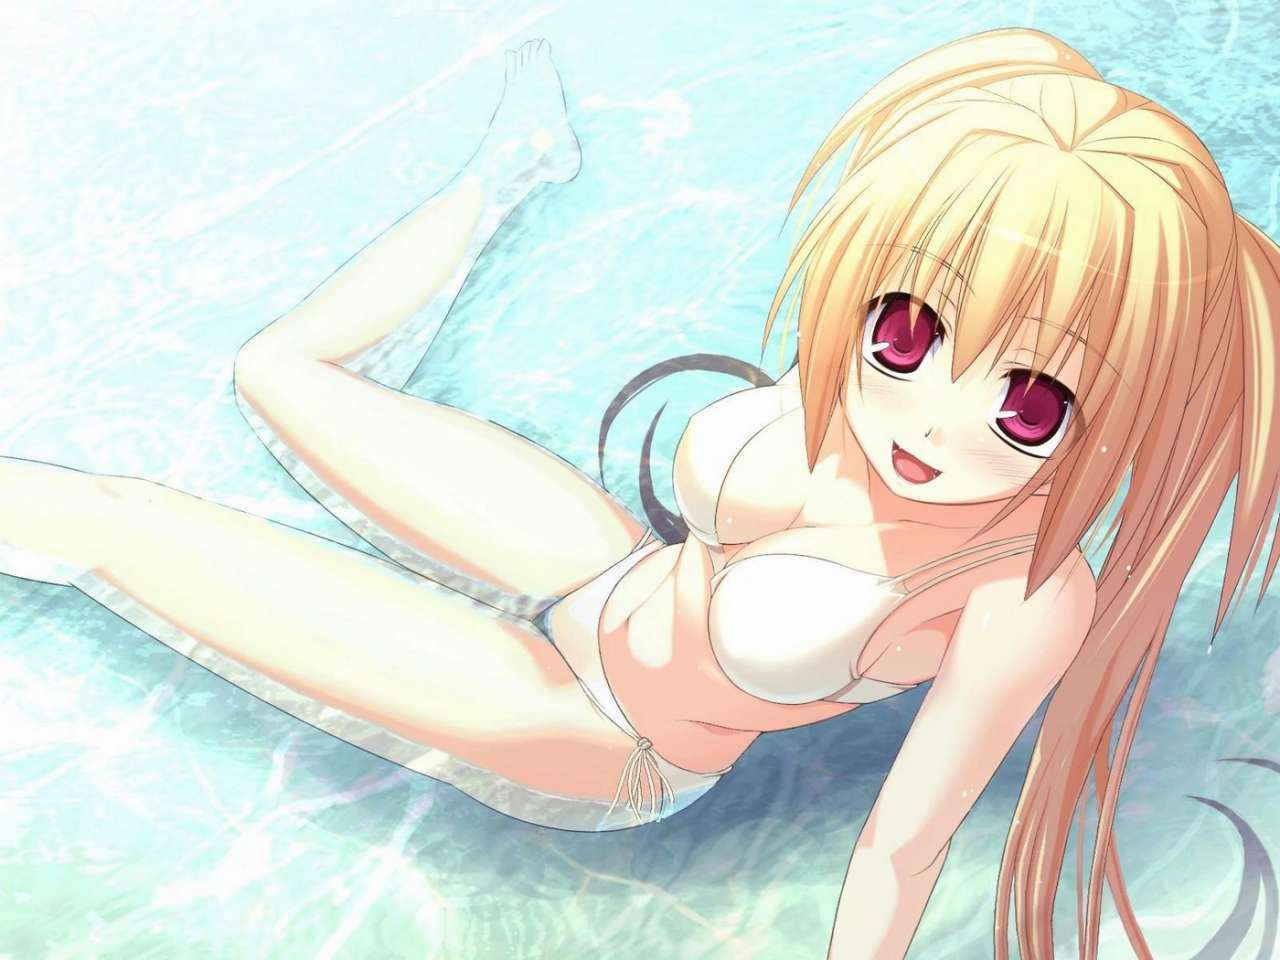 Secondary swimsuit image even on cold days 2